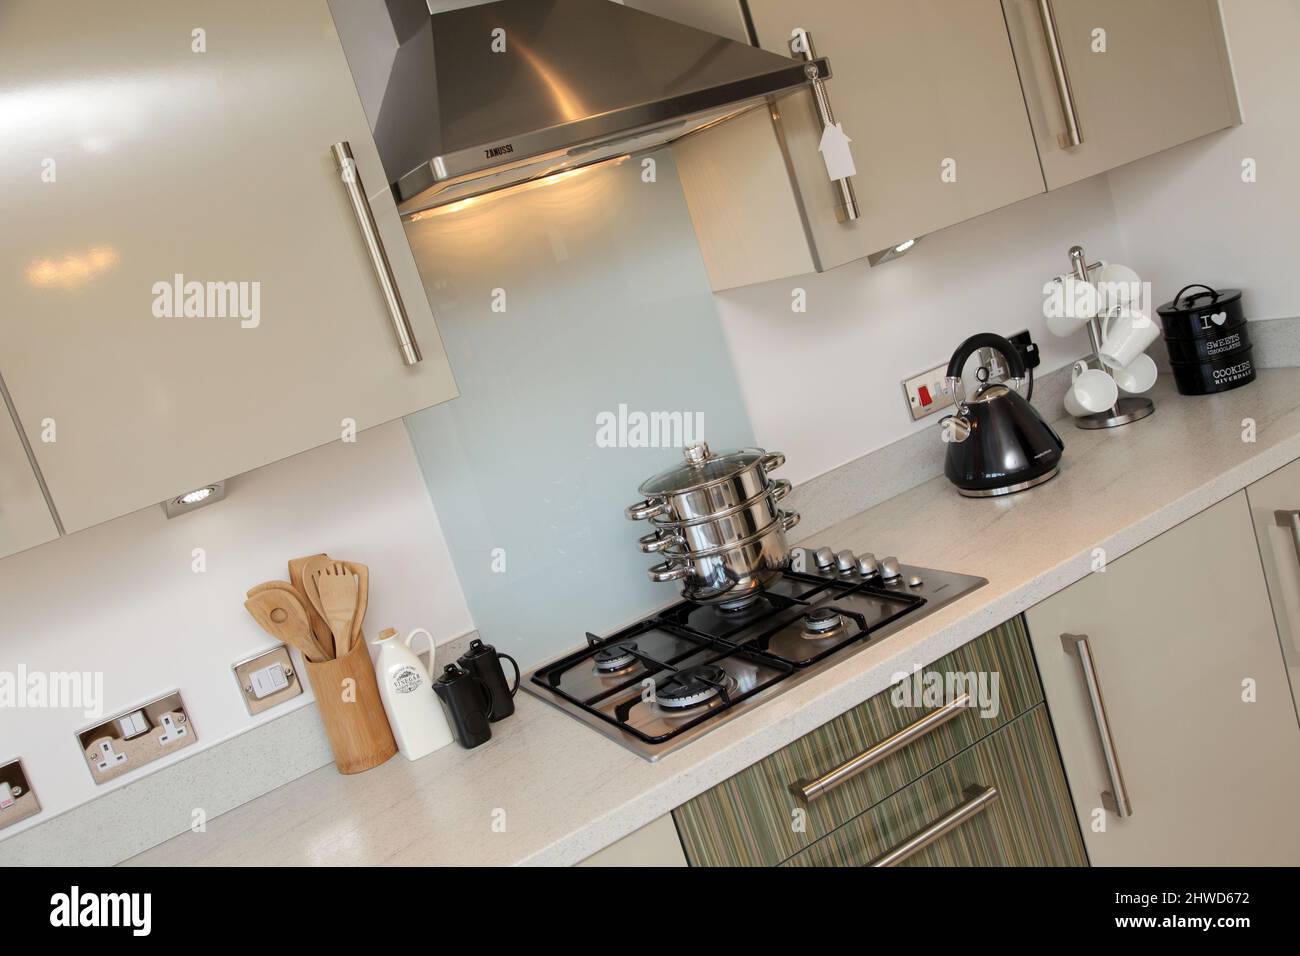 Pans stacked on gas cooker hob in kitchen of modern showhome, fitted kitchen units, floor and wall cupboards Stock Photo